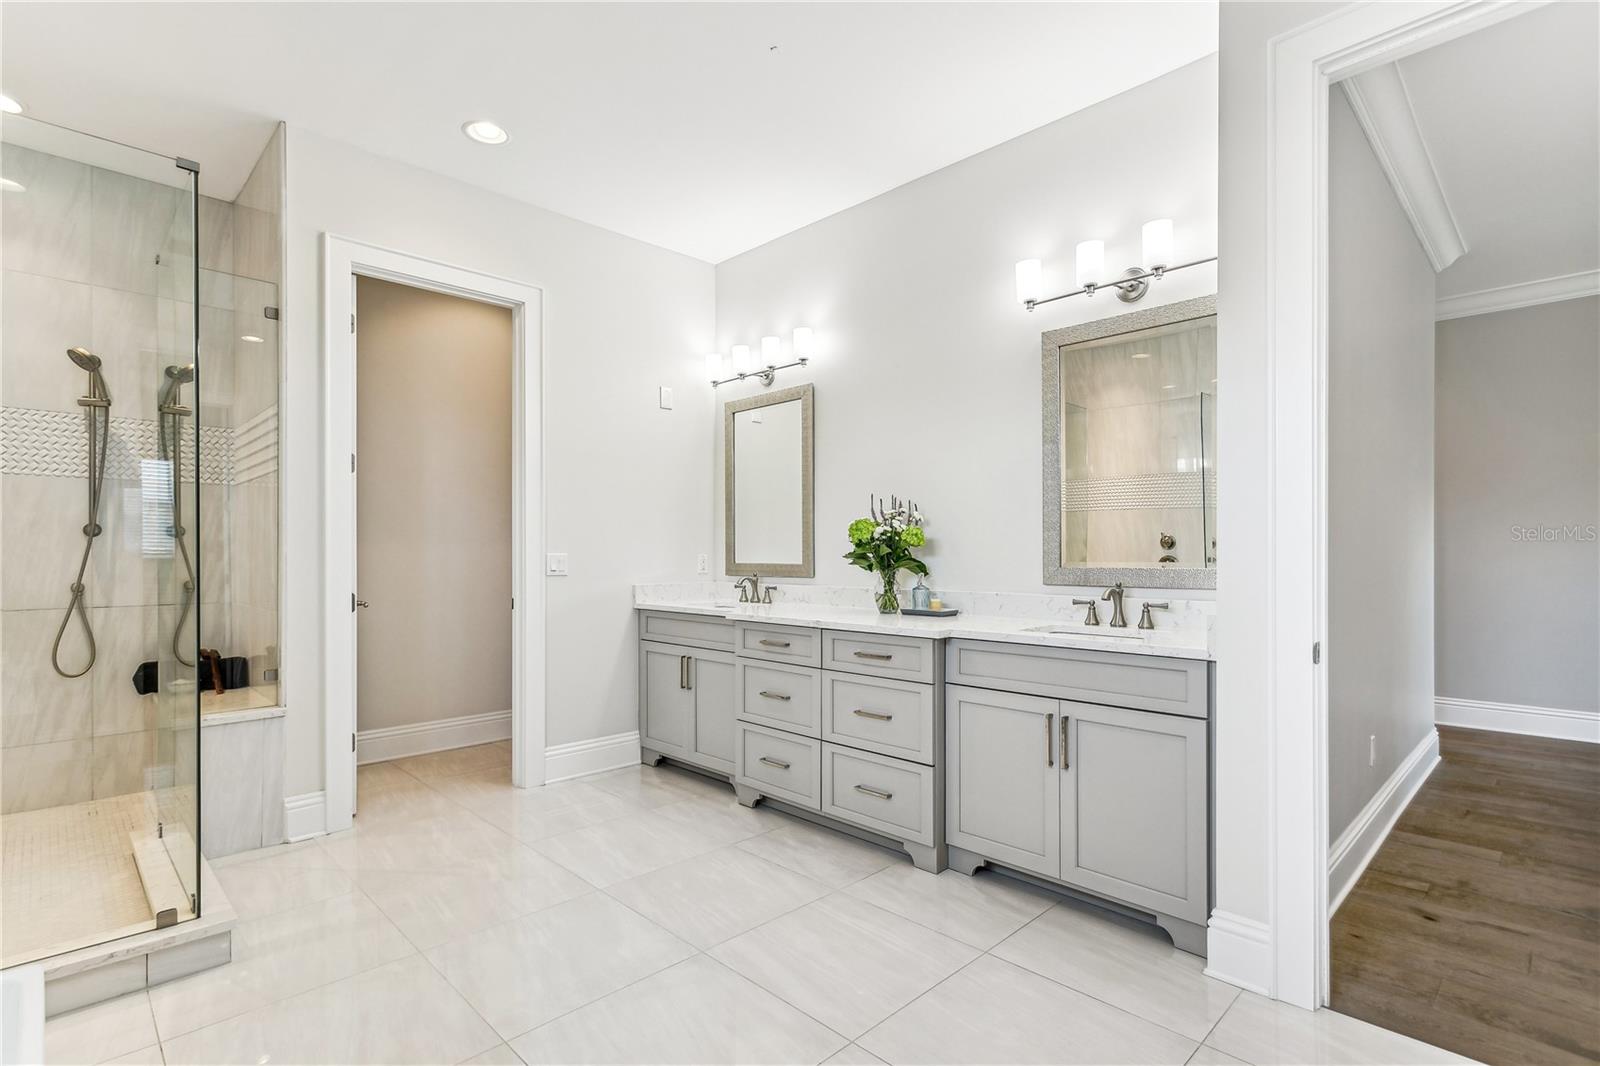 Primary double vanity with separate water closet...